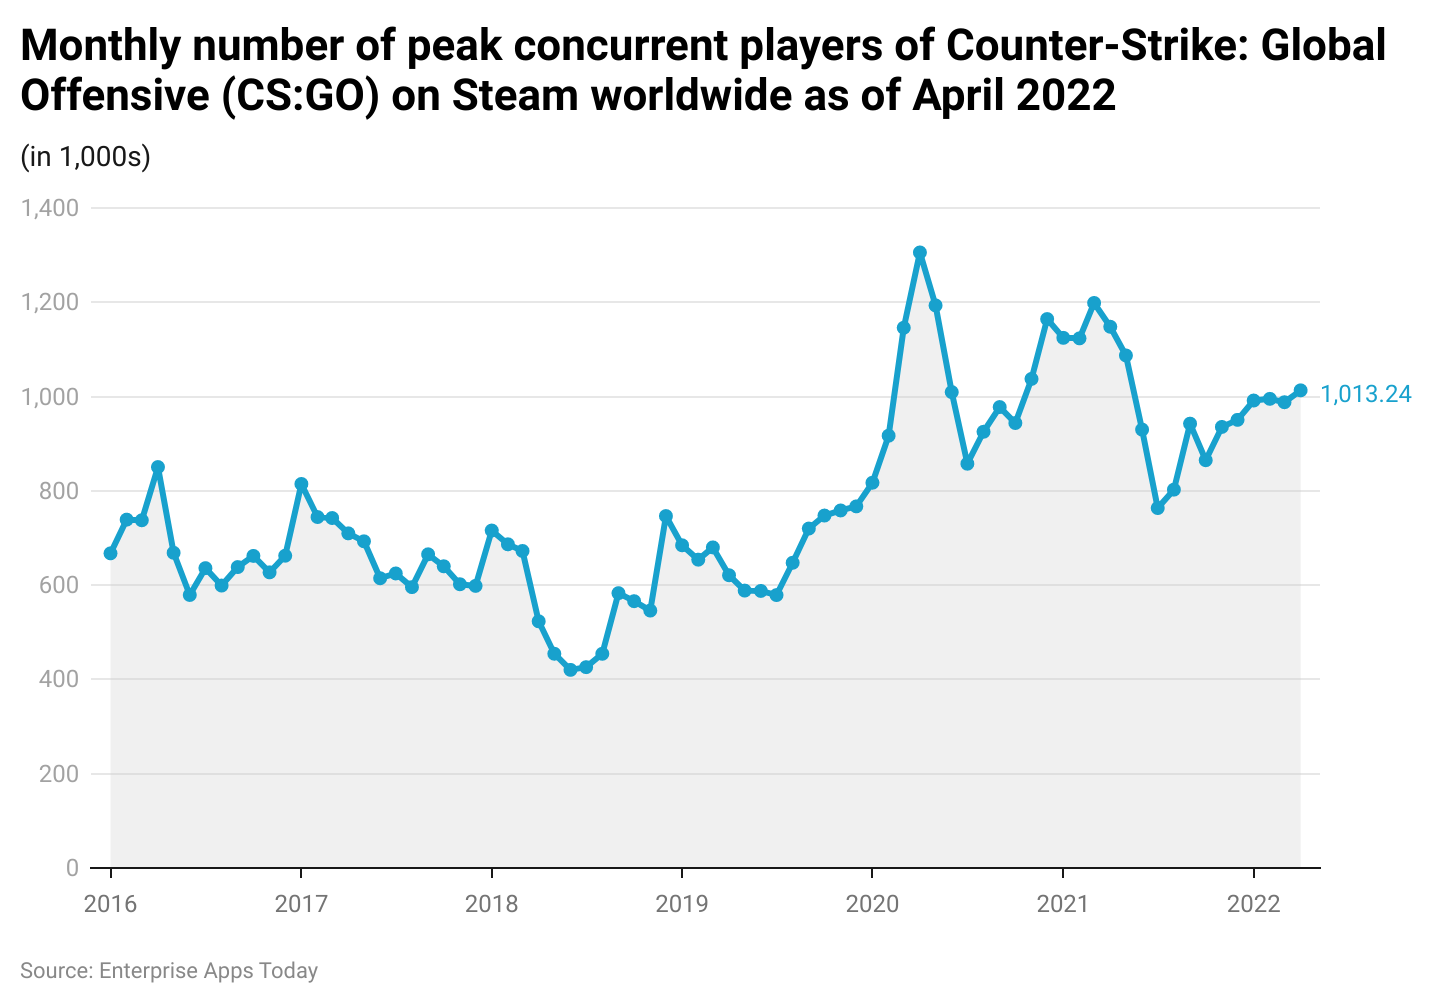 -monthly-number-of-peak-concurrent-players-of-counter-strike-global-offensive-cs-go-on-steam-worldwide-as-of-april-2022